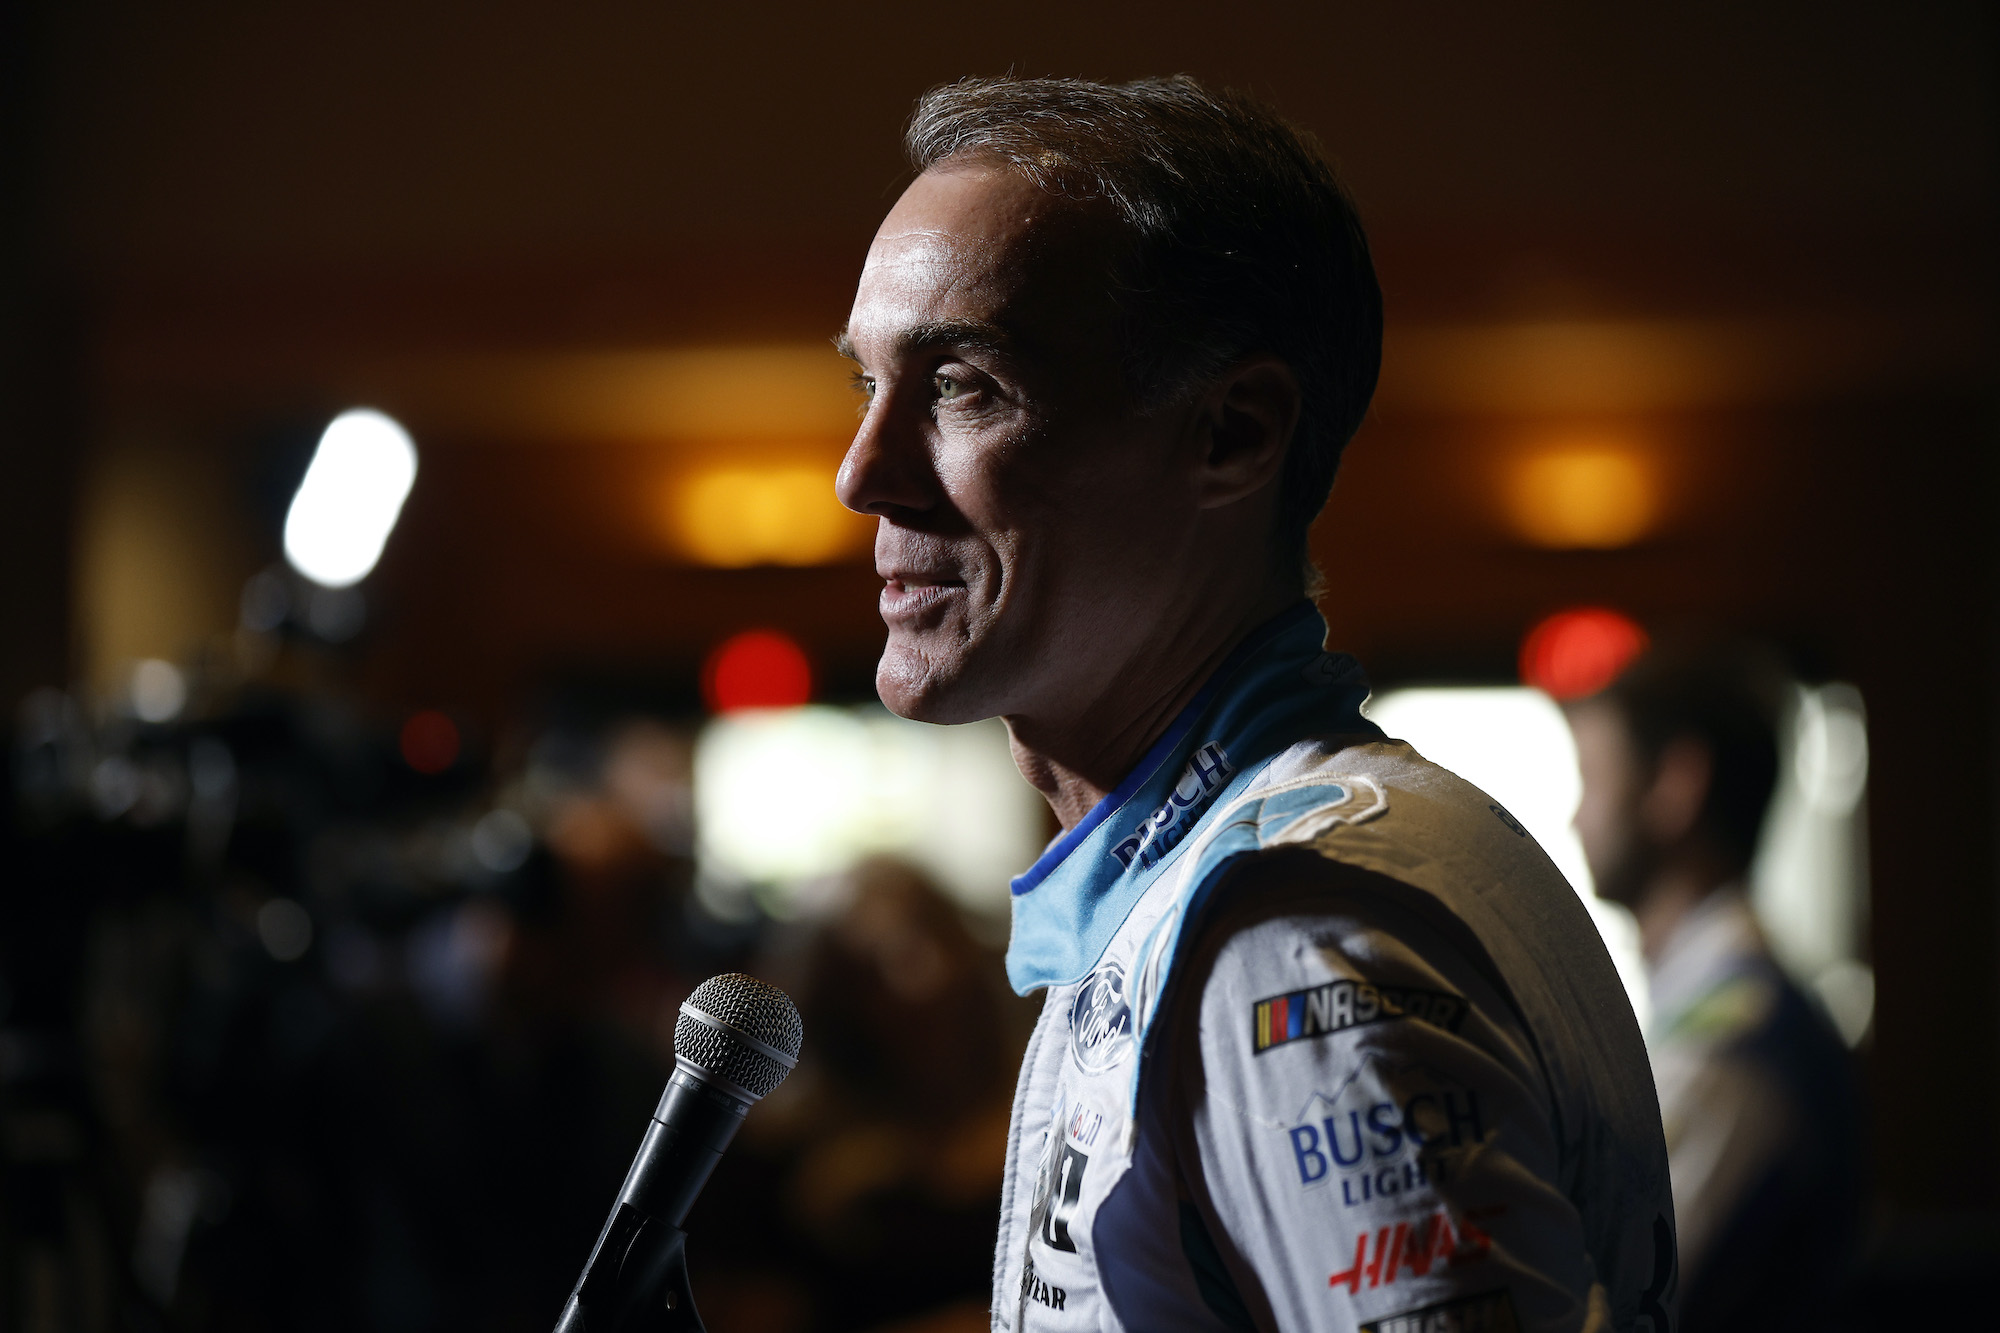 Kevin Harvick Already Has a Job Lined Up for 2024, According to Report